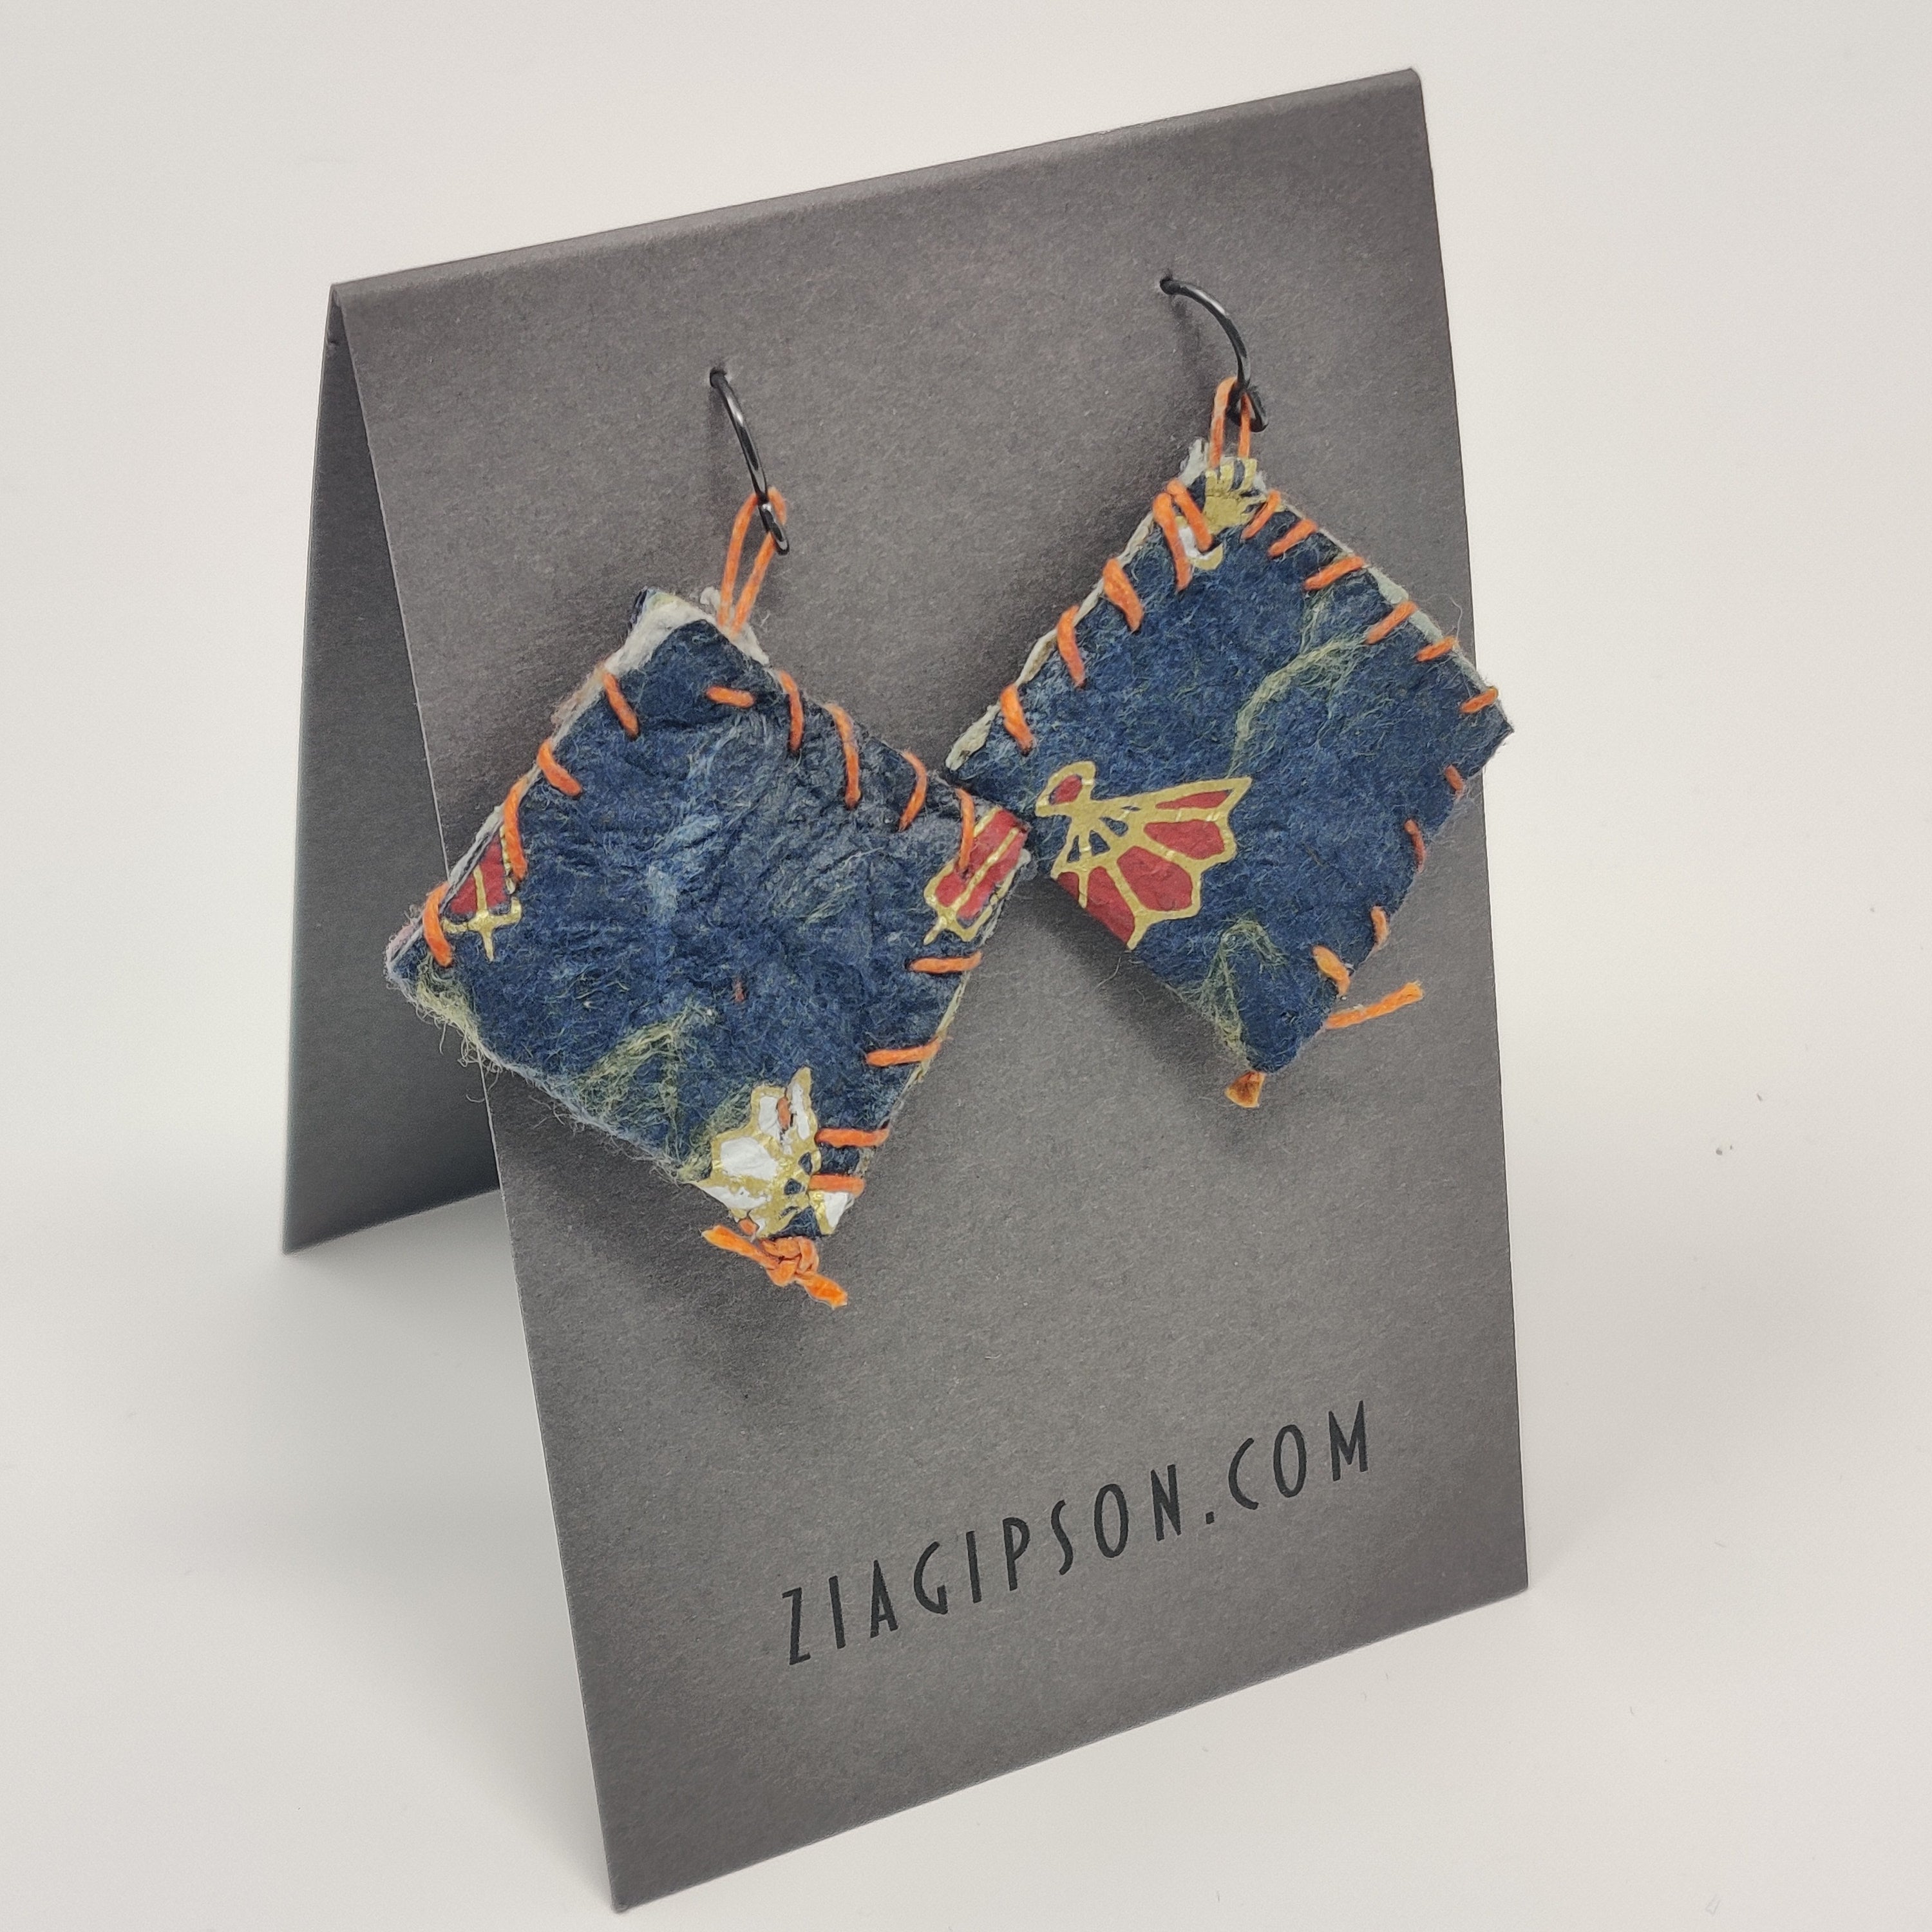 Blue and Orange Stitched Earrings by Zia Gipson